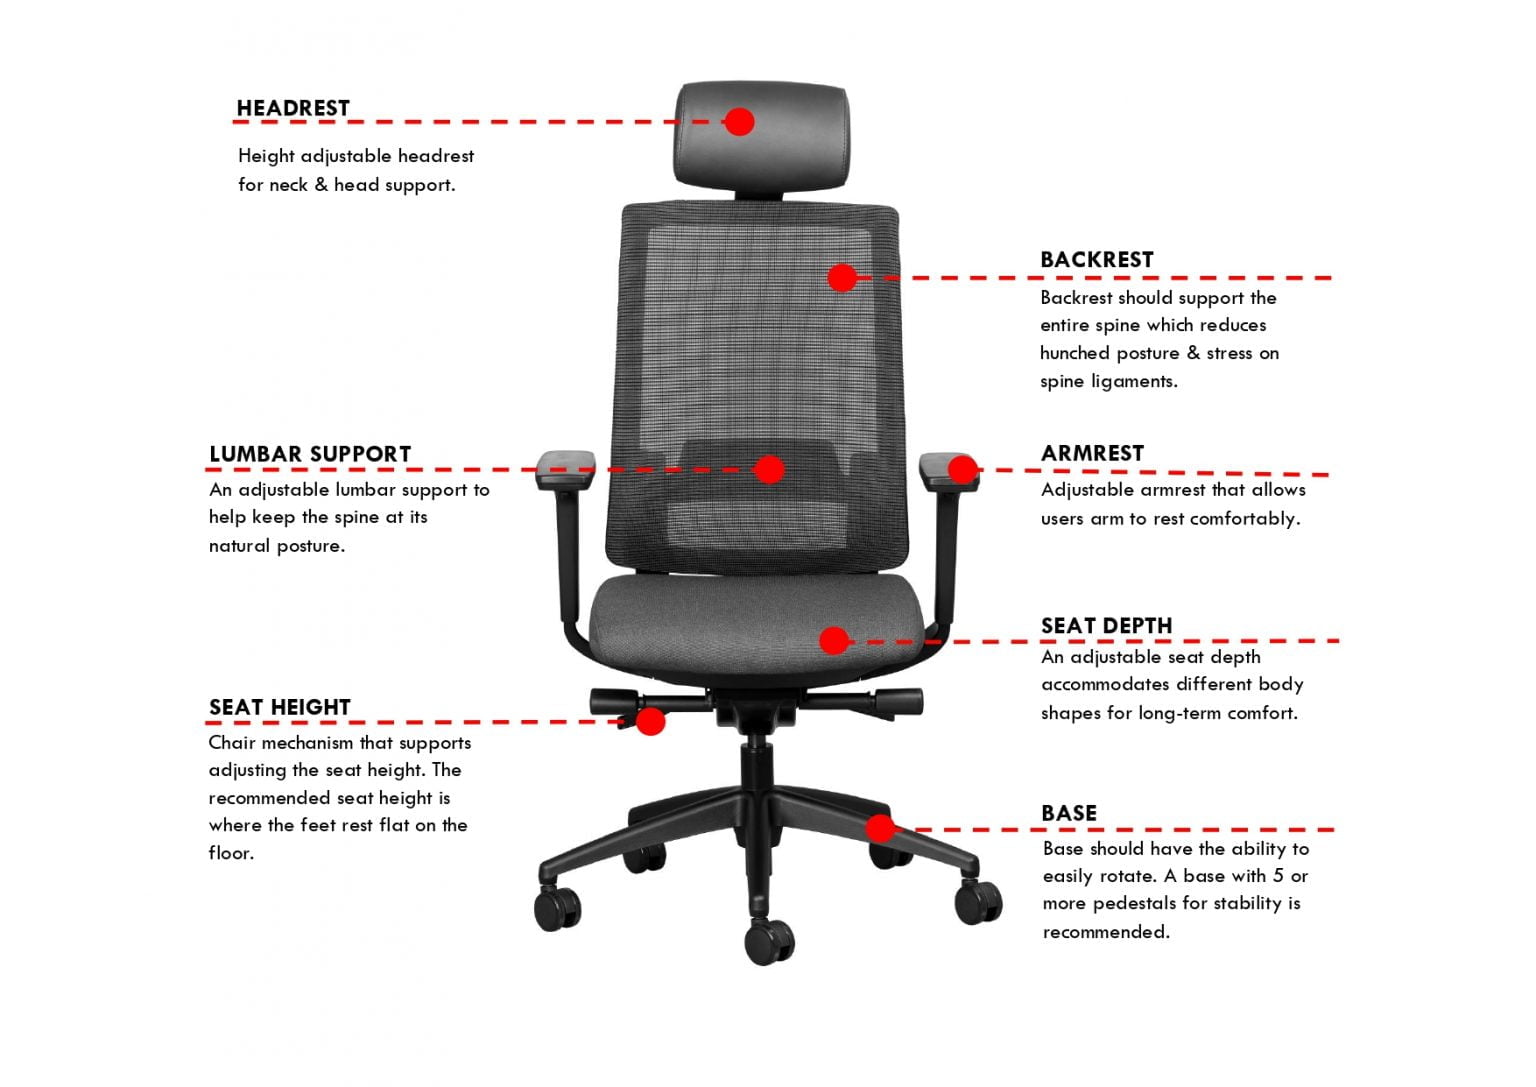 How to adjust your chair for the correct sitting posture - Karo